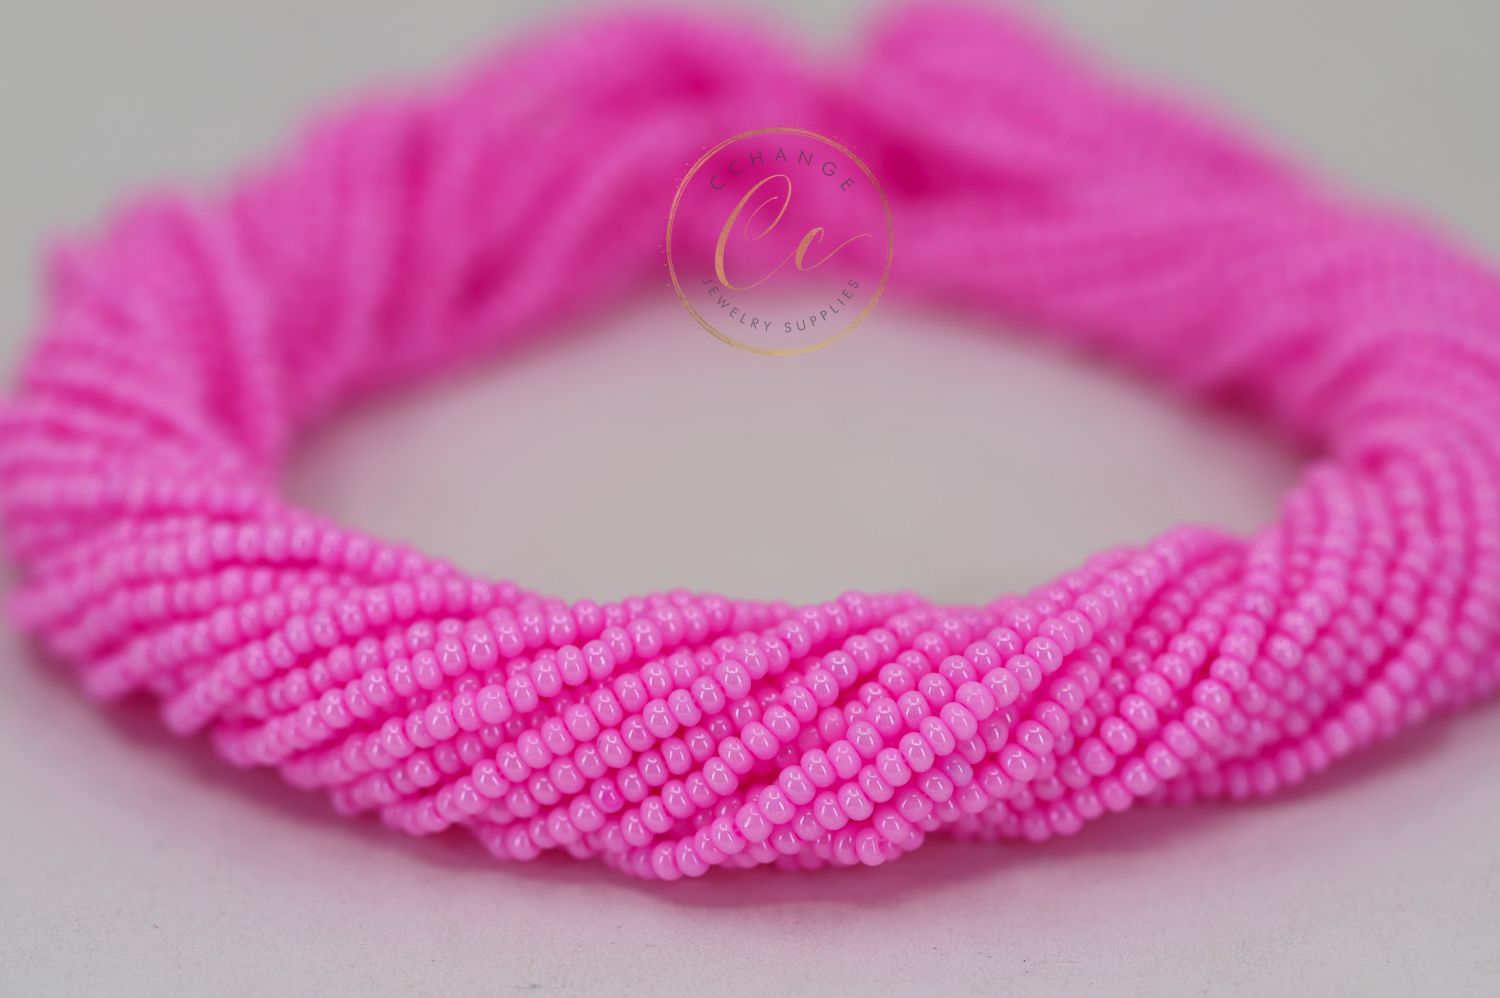 bright-pink-seed-bead-16173